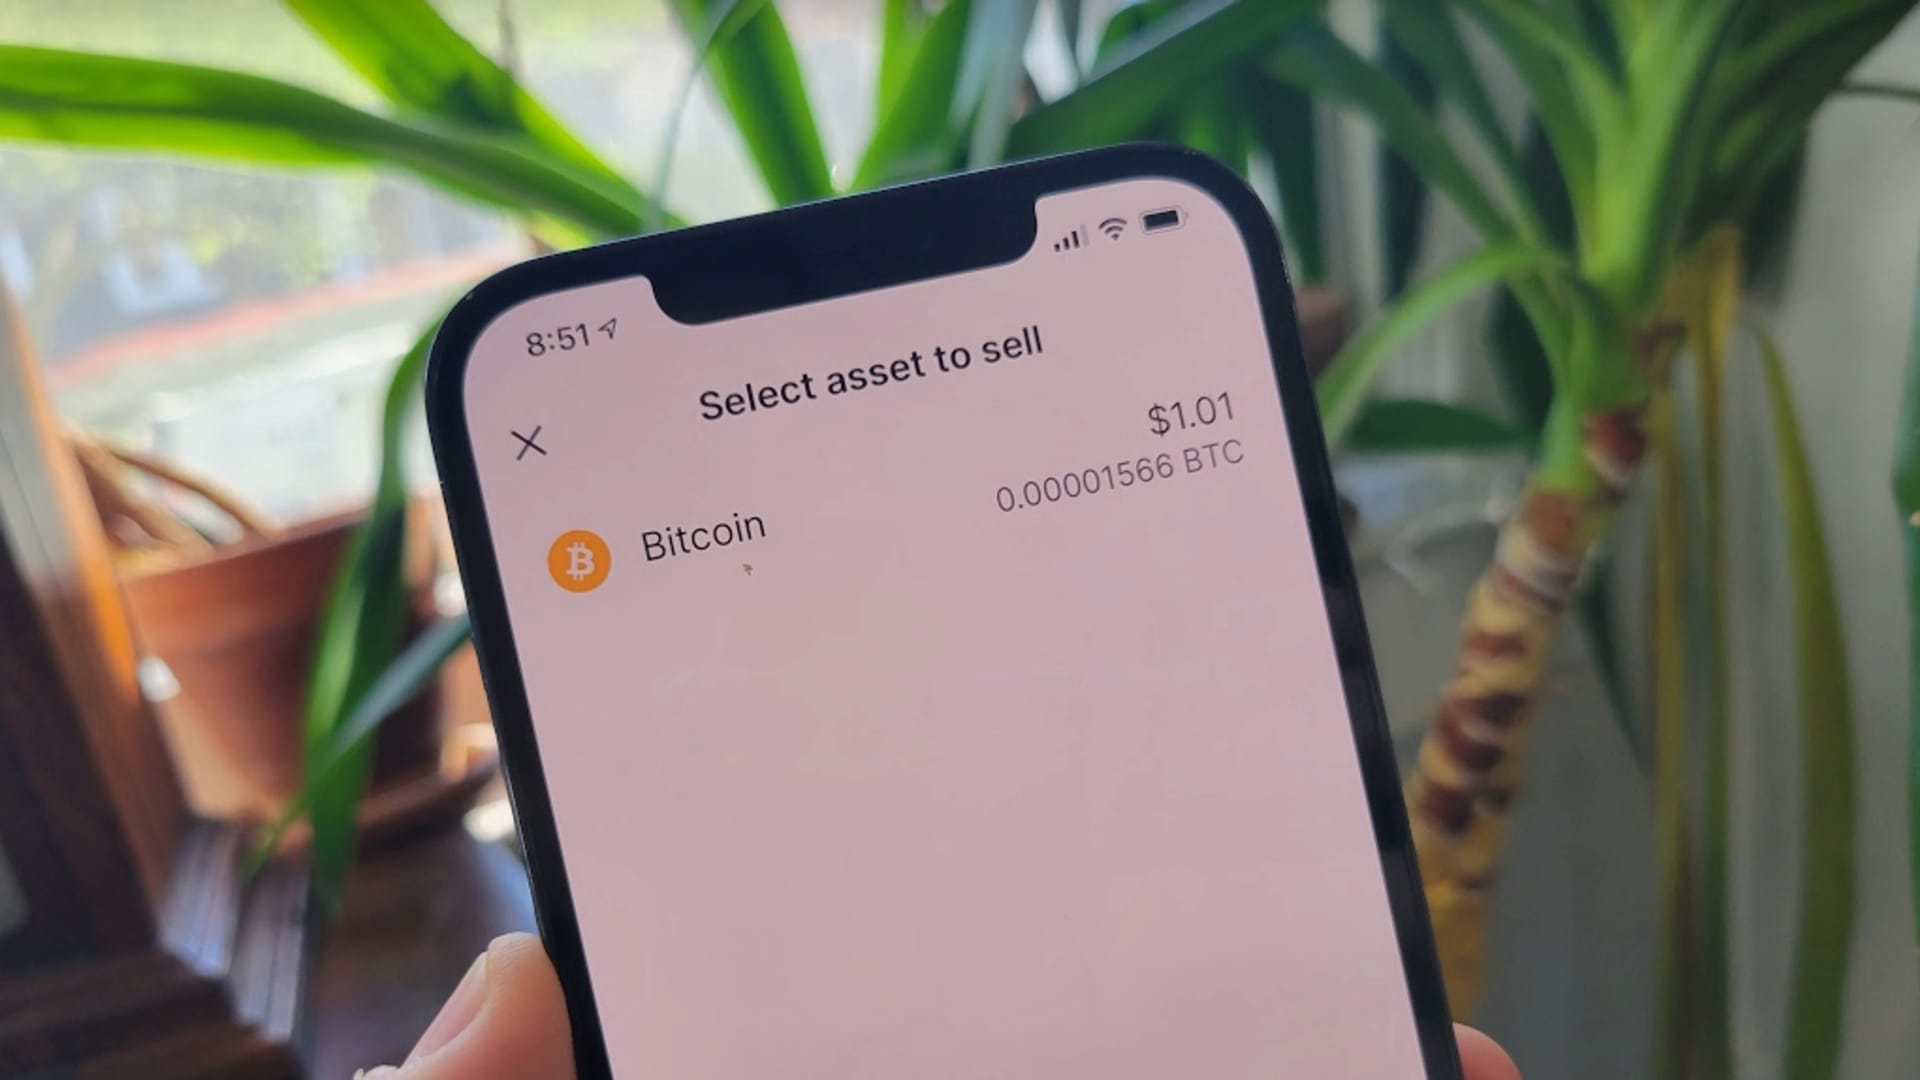 How to sell bitcoin with Coinbase